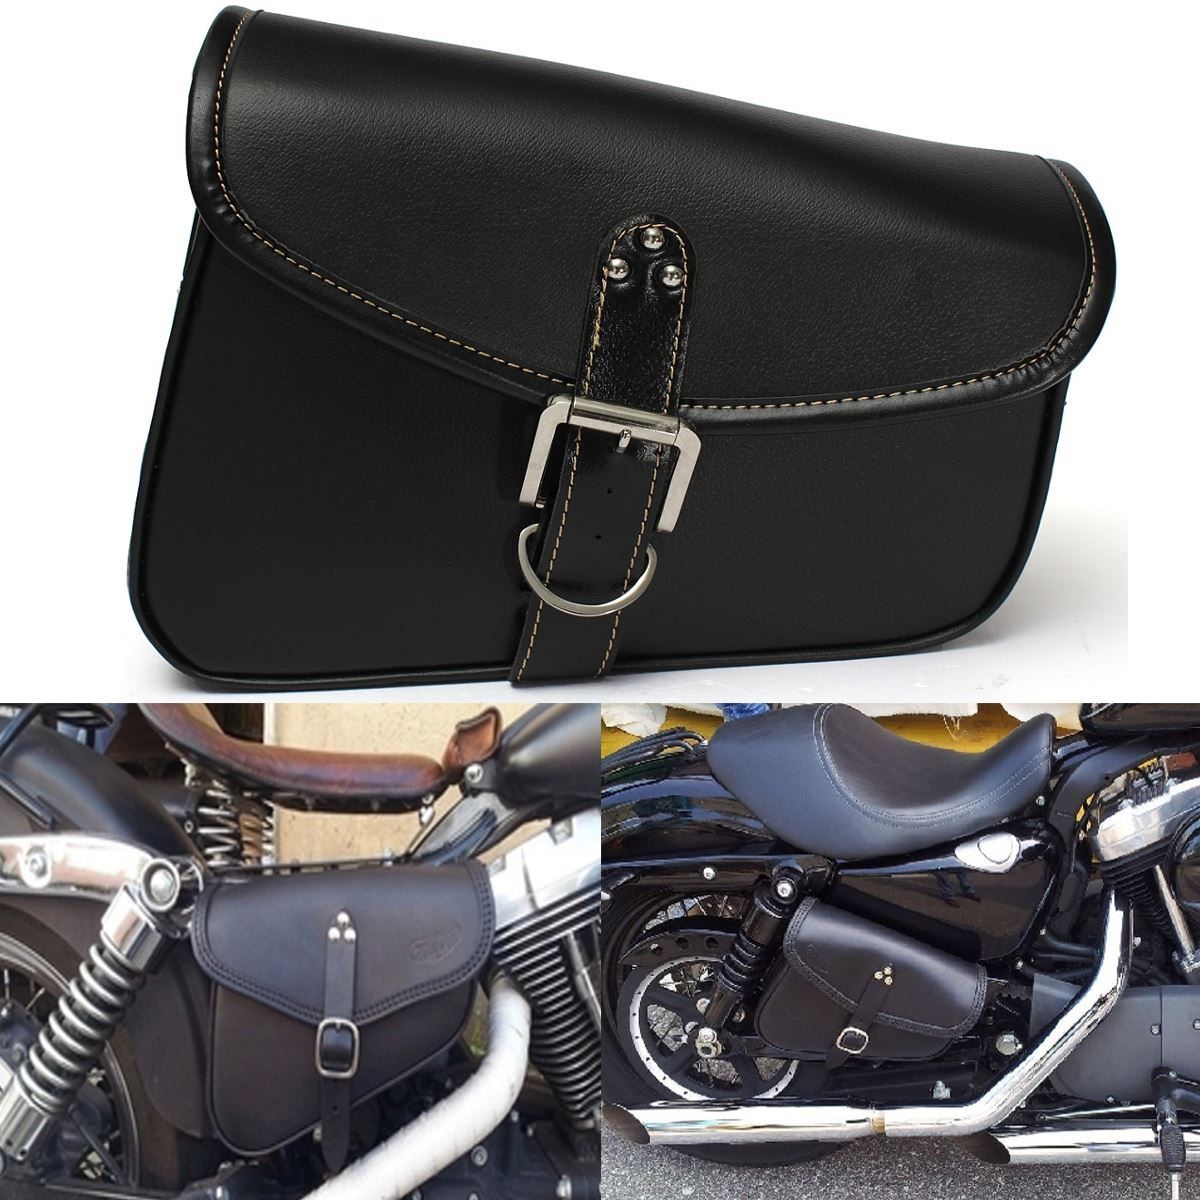 Motorcycle Pu Leather Saddlebags Saddle Tool Pouch Side Bag Storage For Harley Order&$18no Track ...